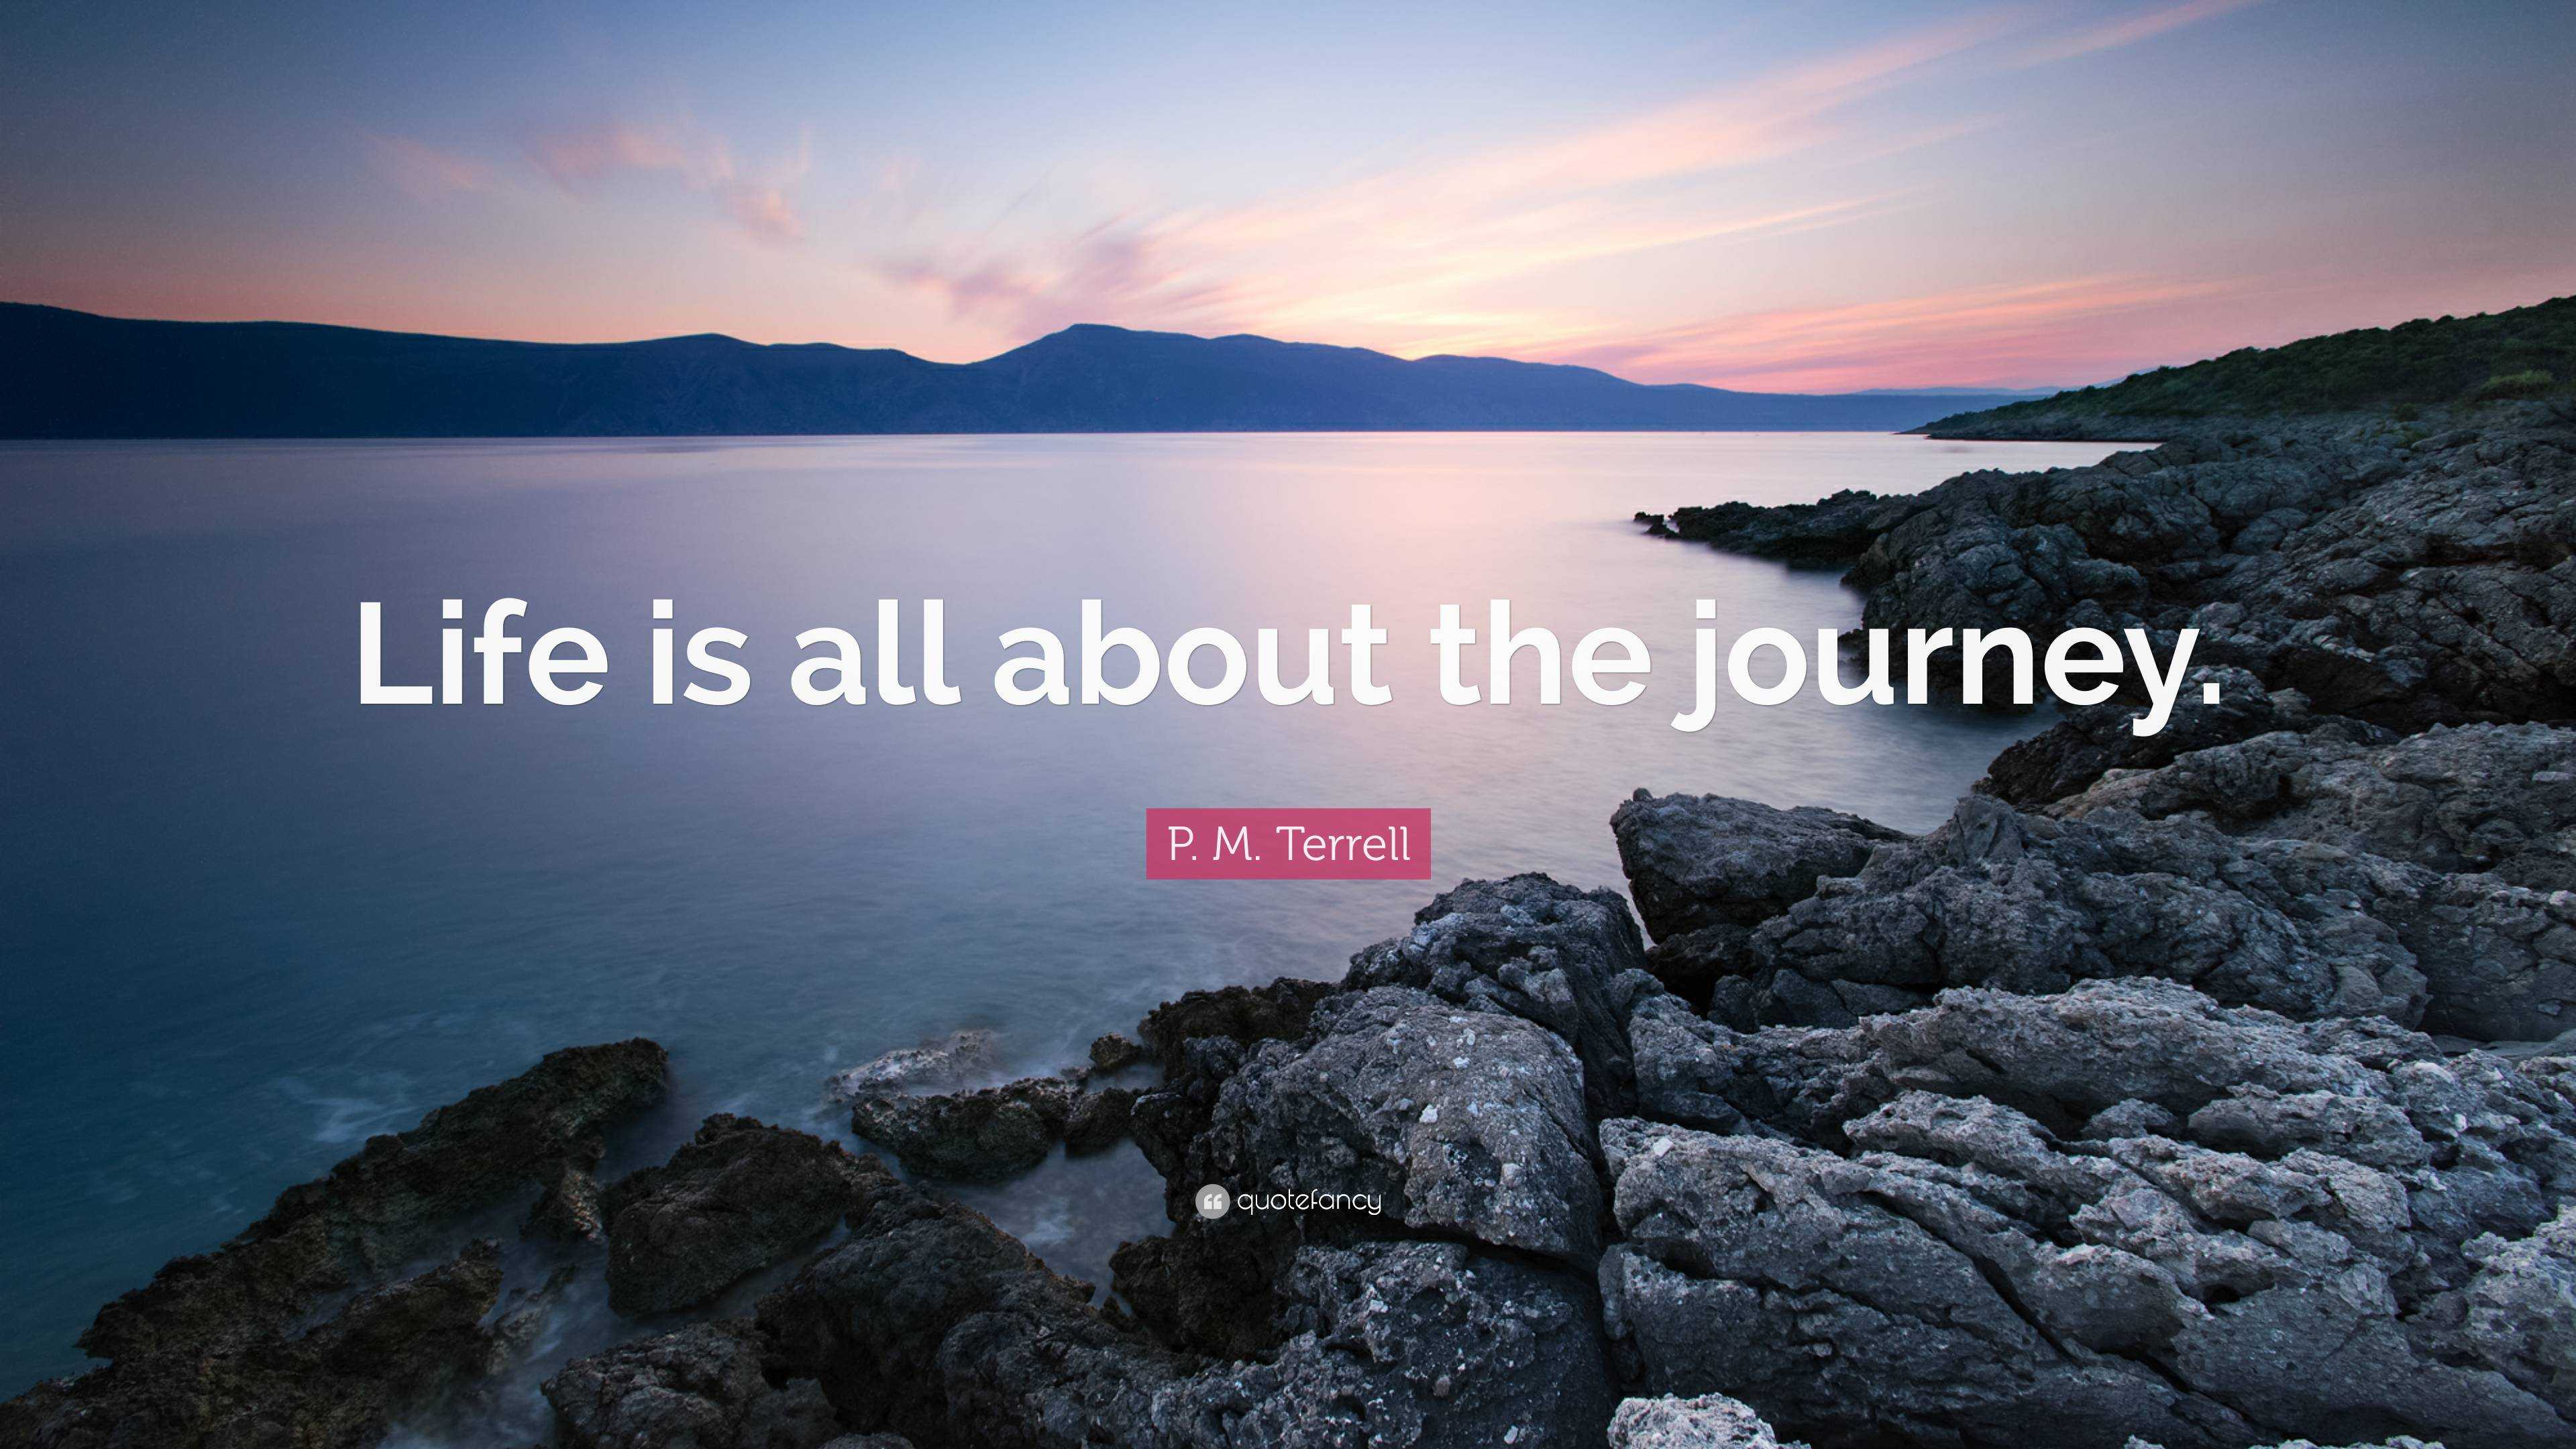 P. M. Terrell Quote: “Life is all about the journey.”